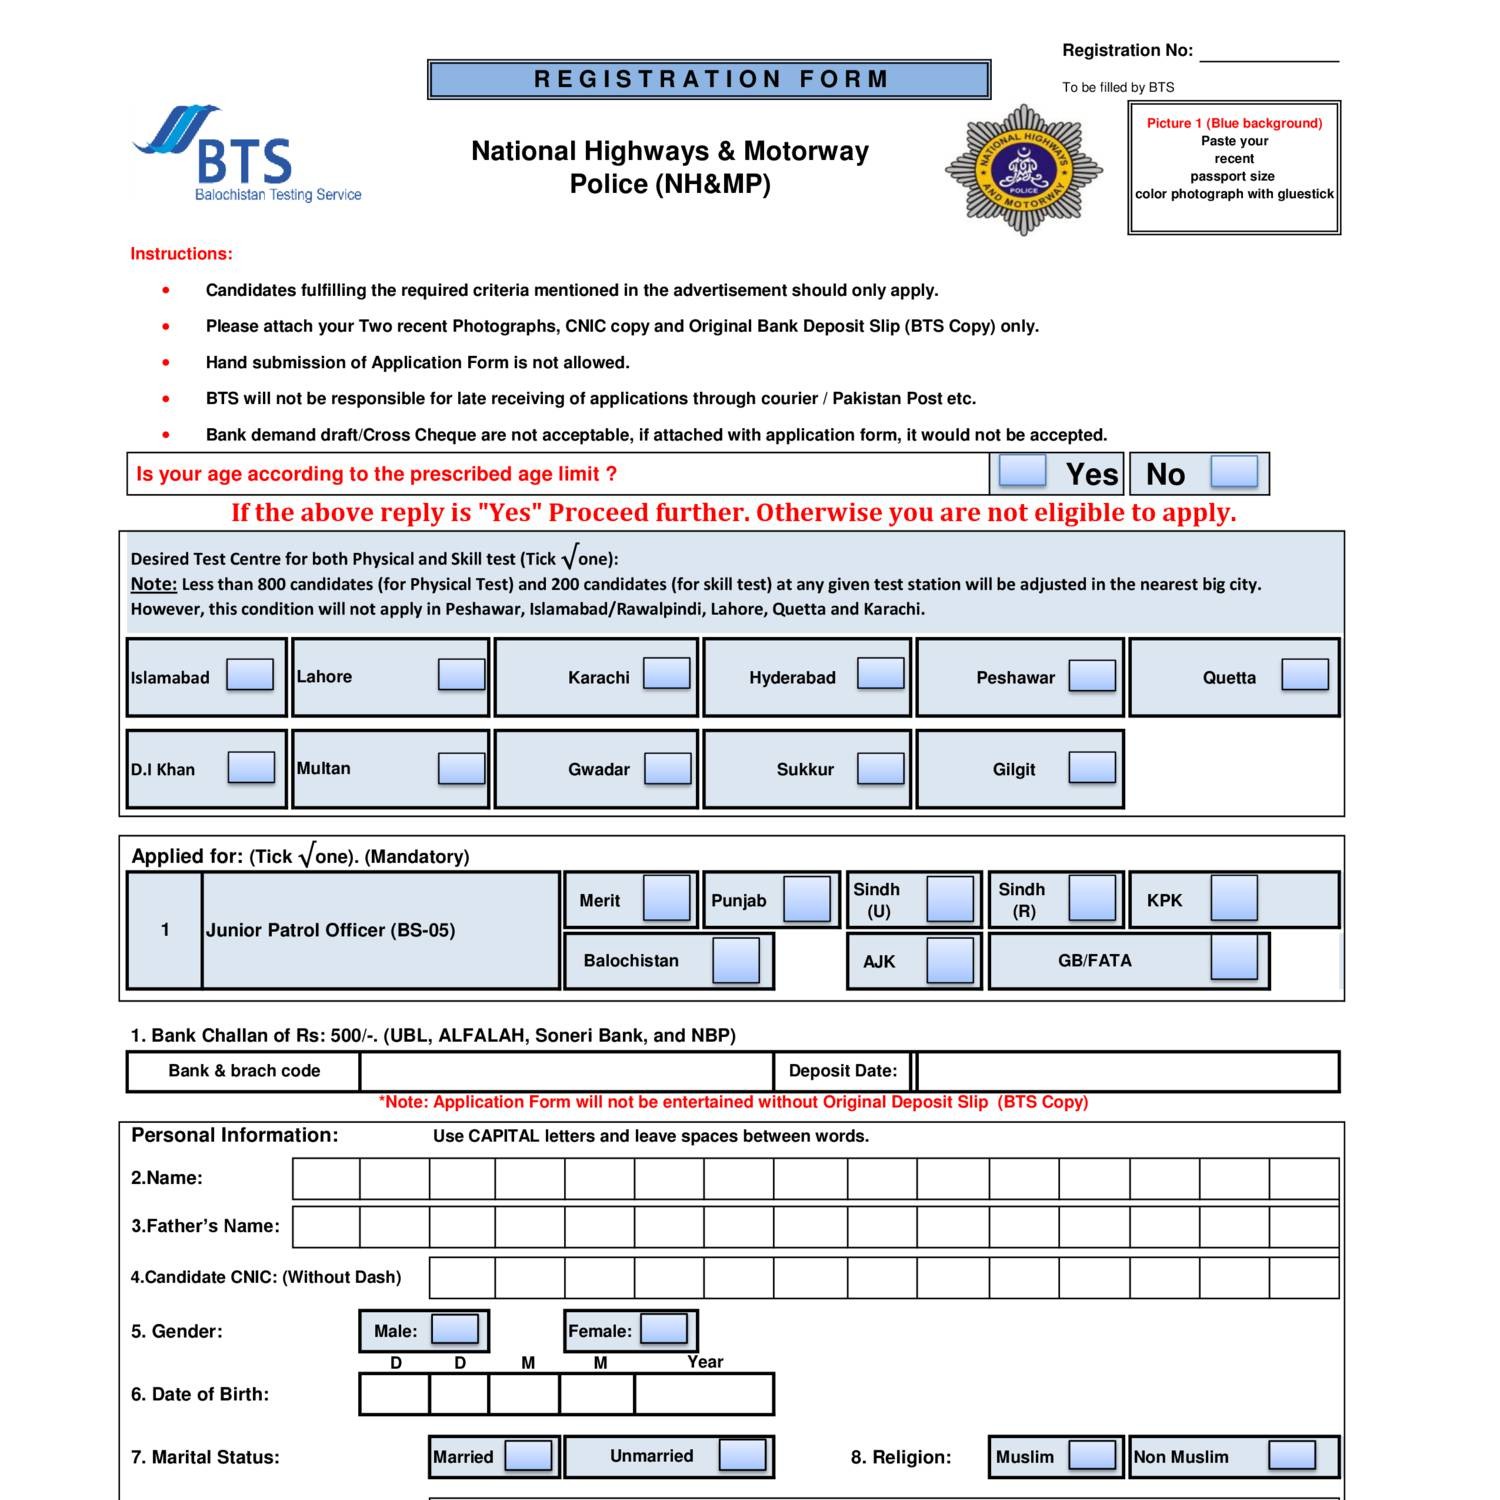 National Highway and Motorway Police Application Form.pdf DocDroid